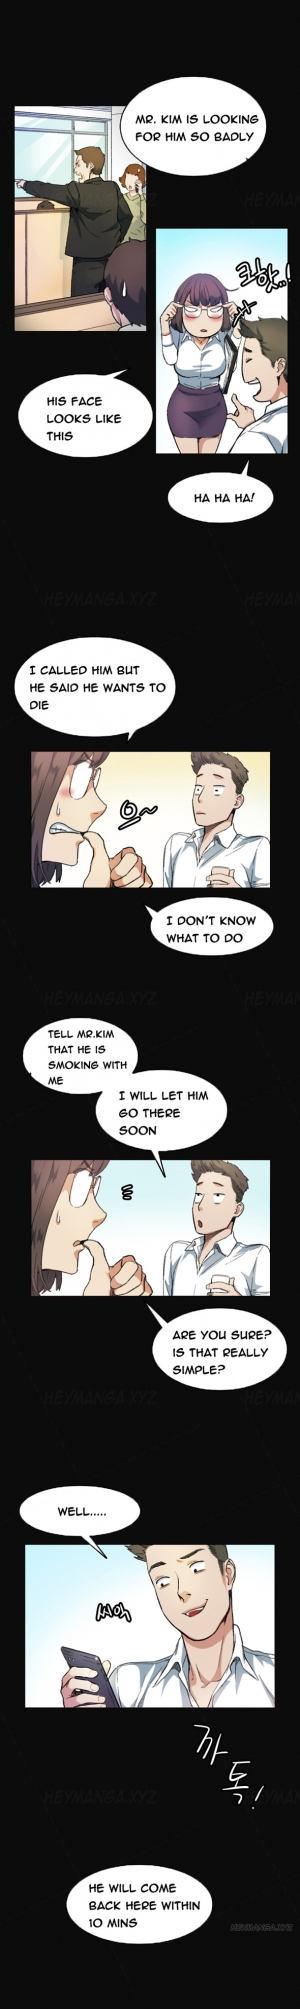  By Chance (Ep. 1-30)  [English] - Page 115